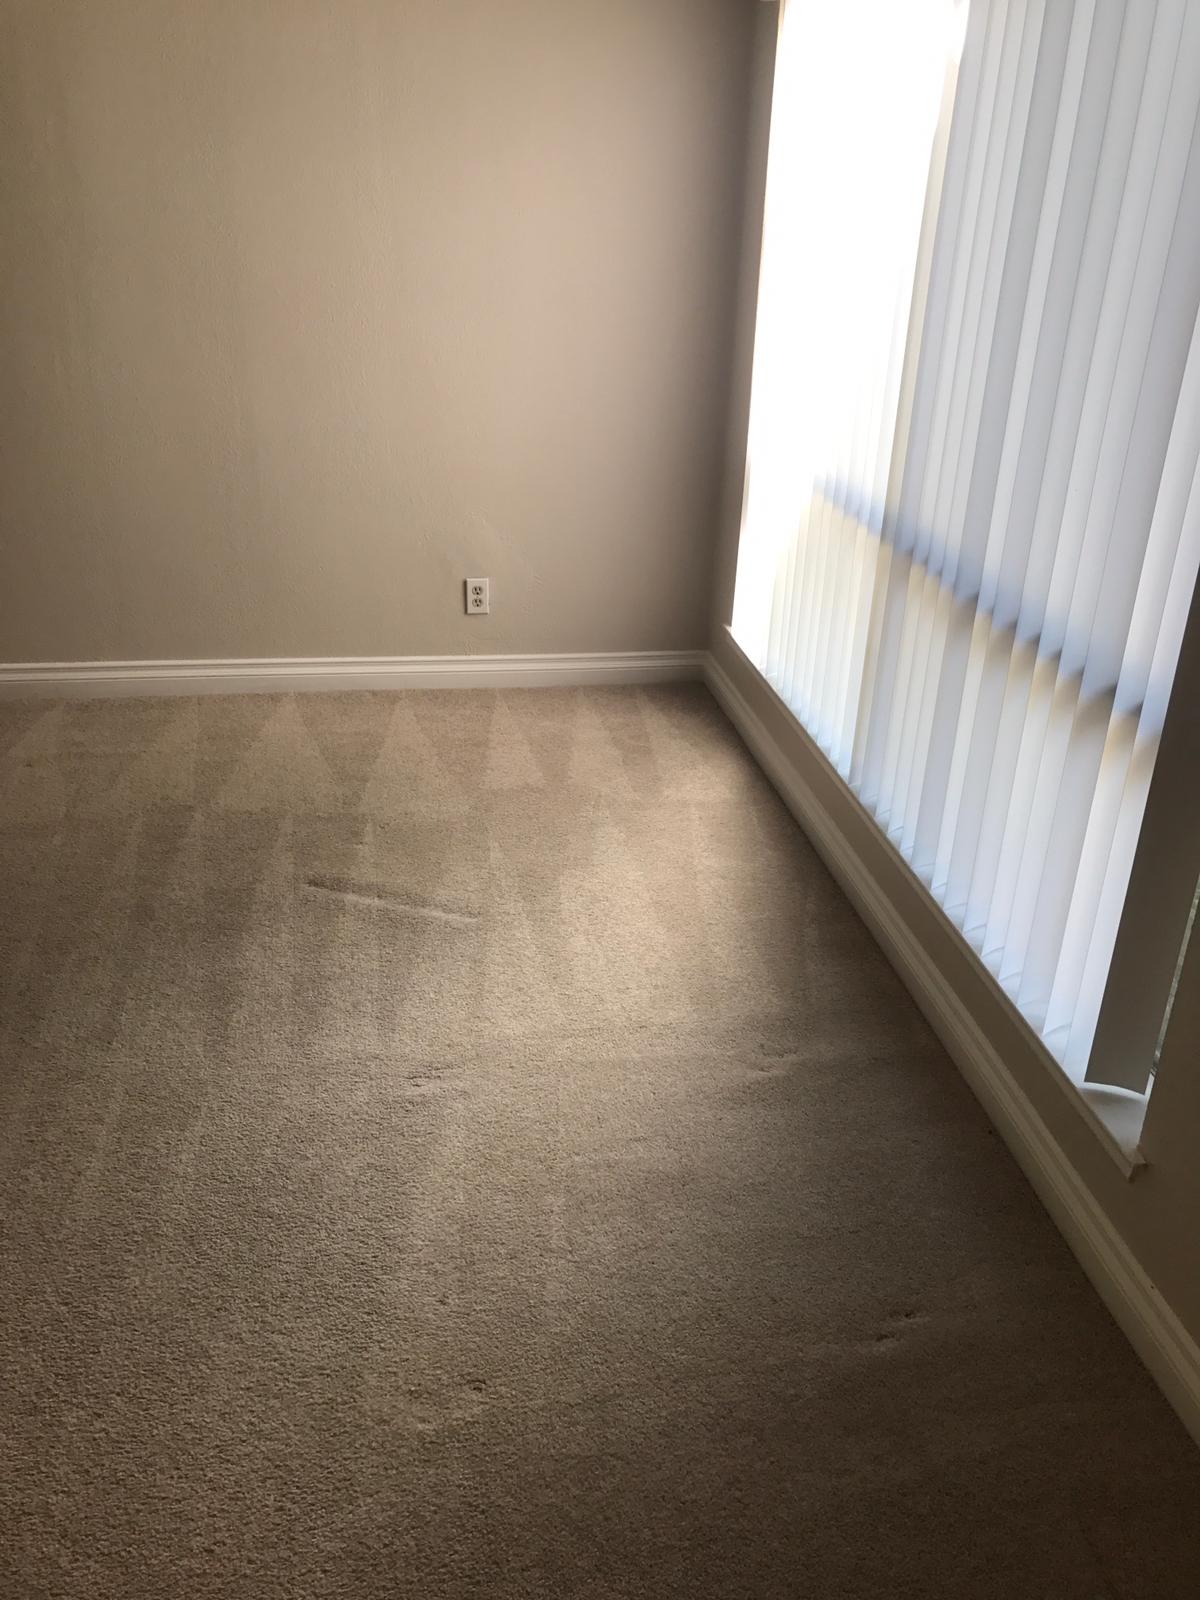 same day carpet cleaning in orange county